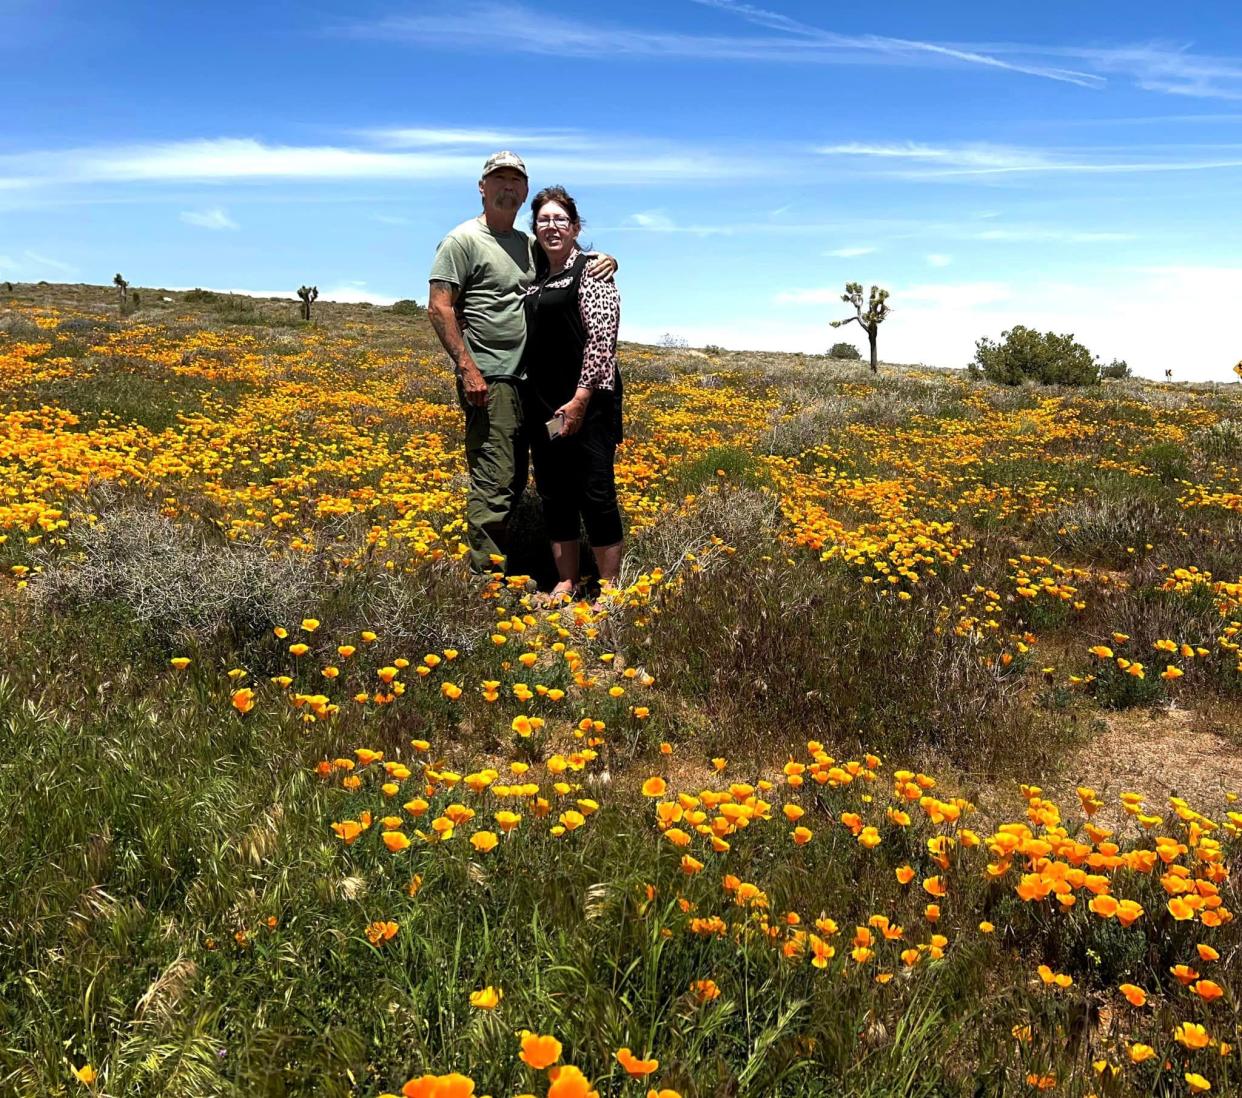 Sid and Debi Hultquist on one of their wildflower expeditions. He said wildflowers are on full display across Southern California and in parts of Apple Valley and Hesperia.